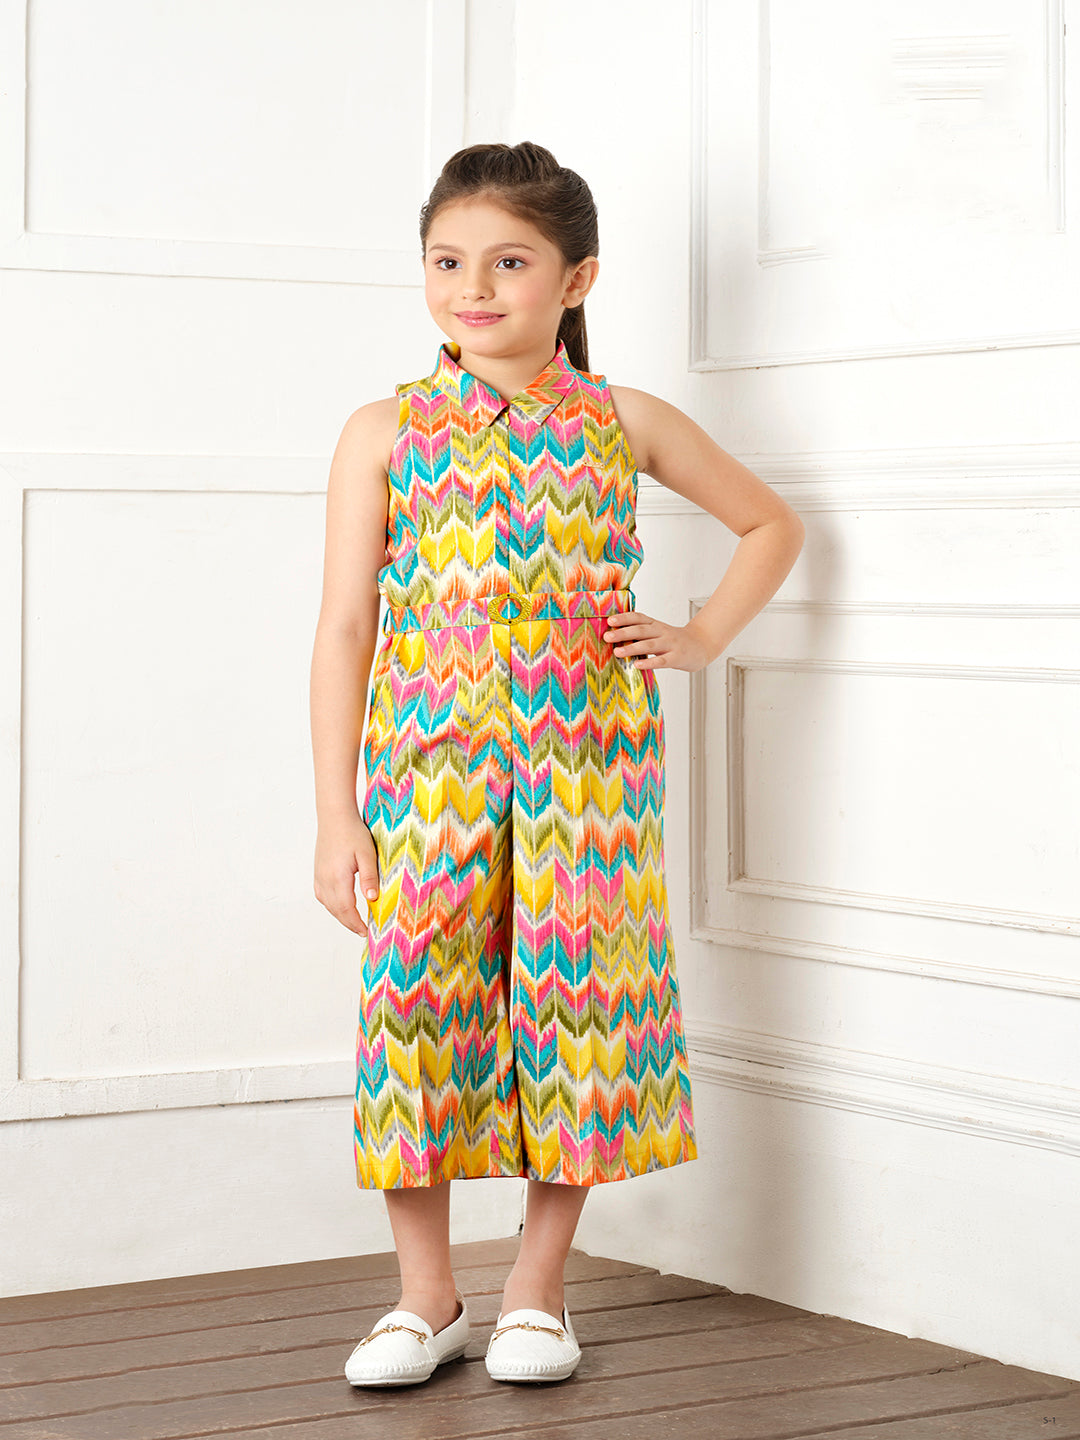 Best Kids Wear Online Shoping at tinygirlindiacom